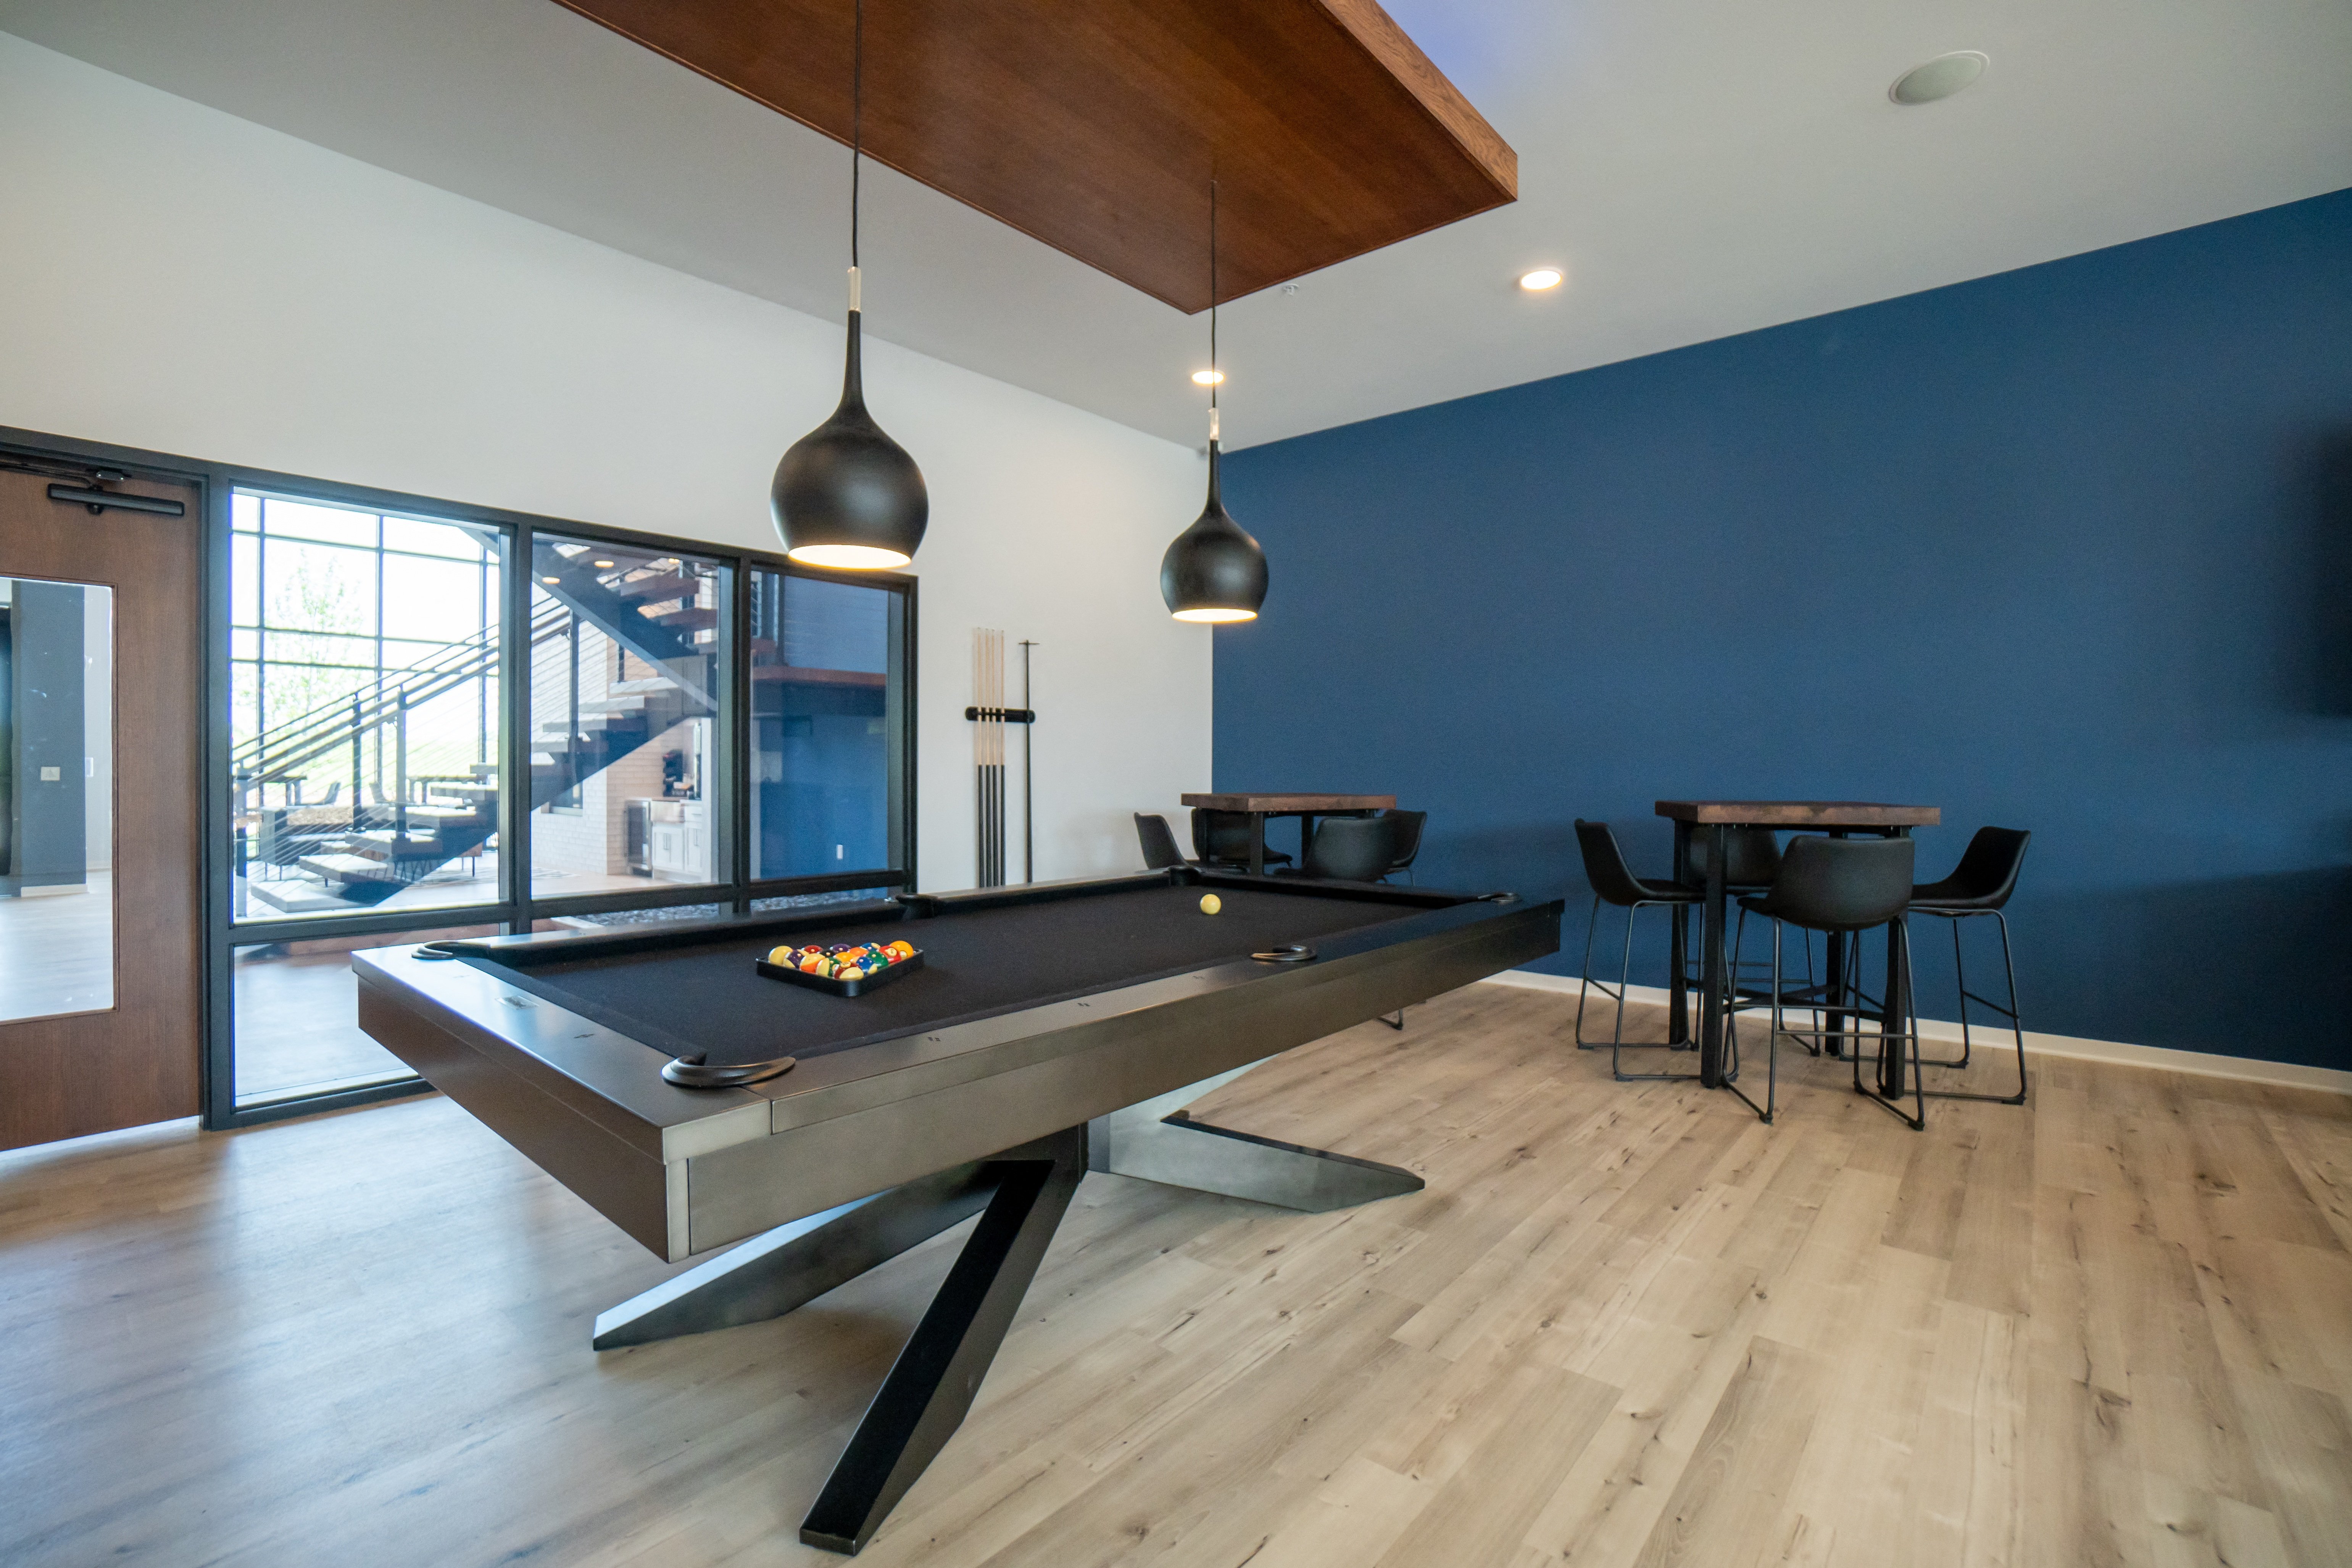 a pool table in a living room with blue walls and wood floors